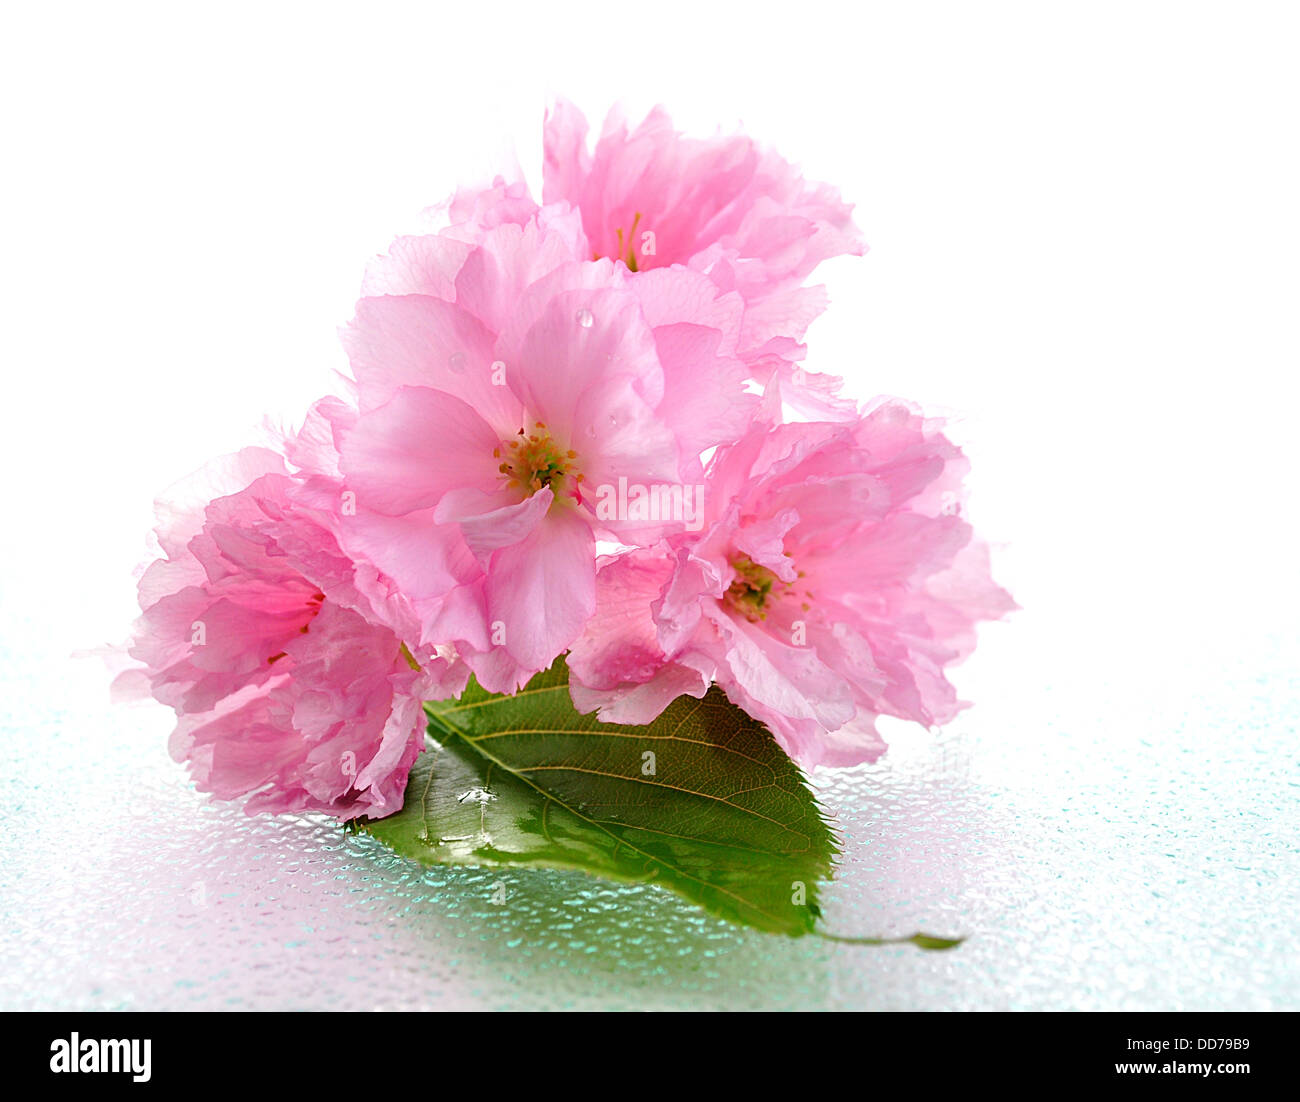 Blossoming almond flowers Stock Photo